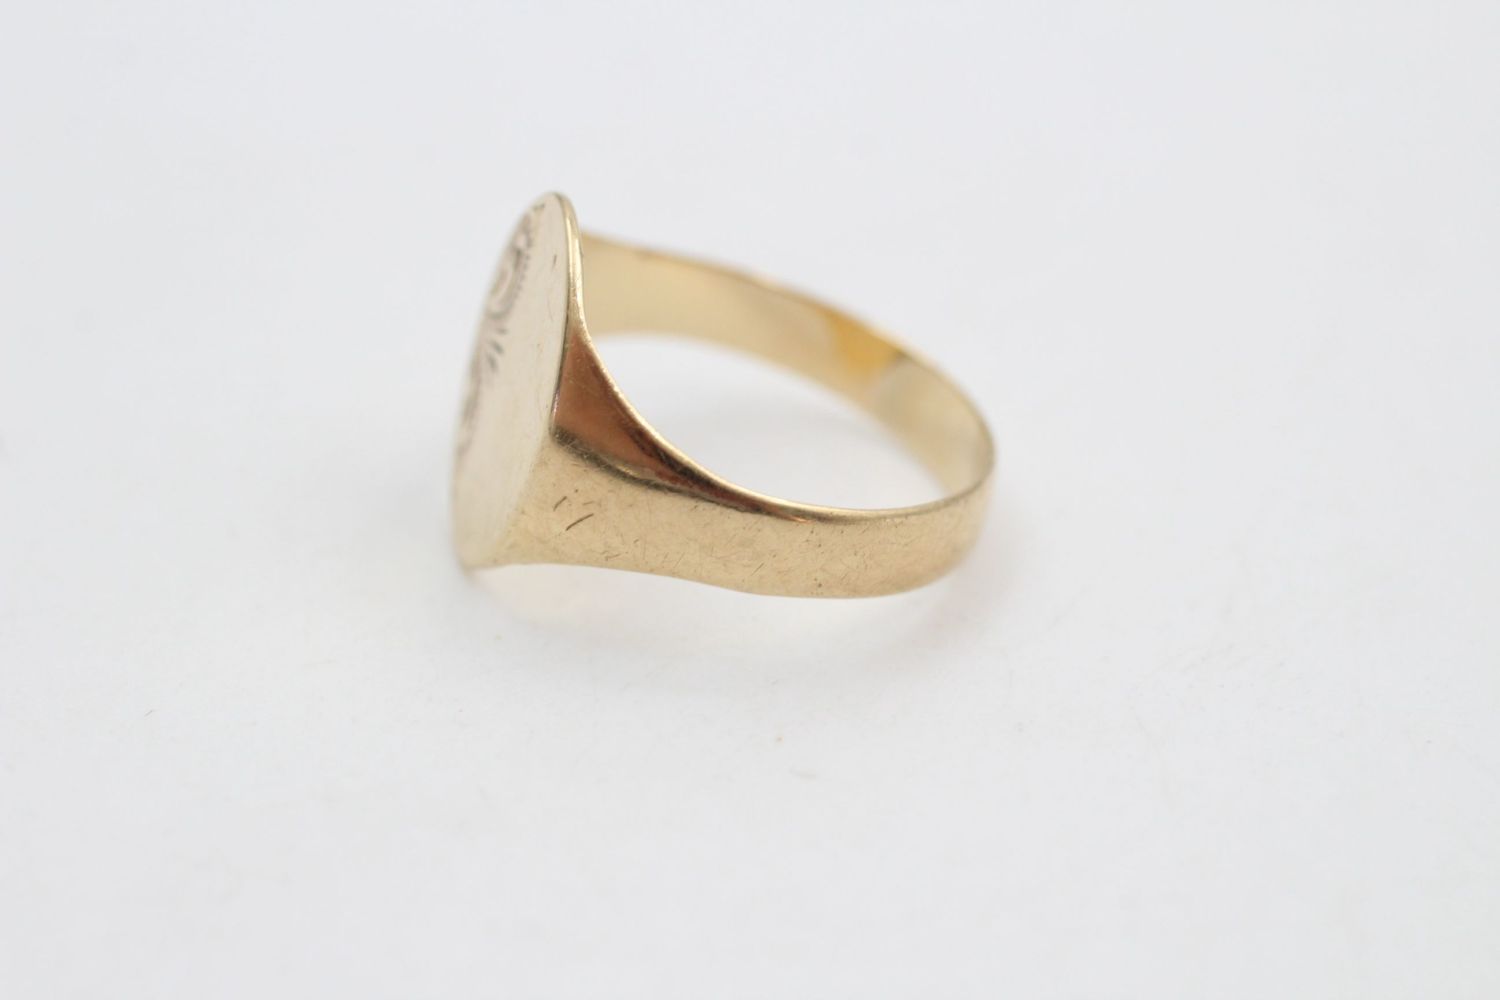 9ct Gold engraved oval signet ring 2.8 grams gross - Image 3 of 5